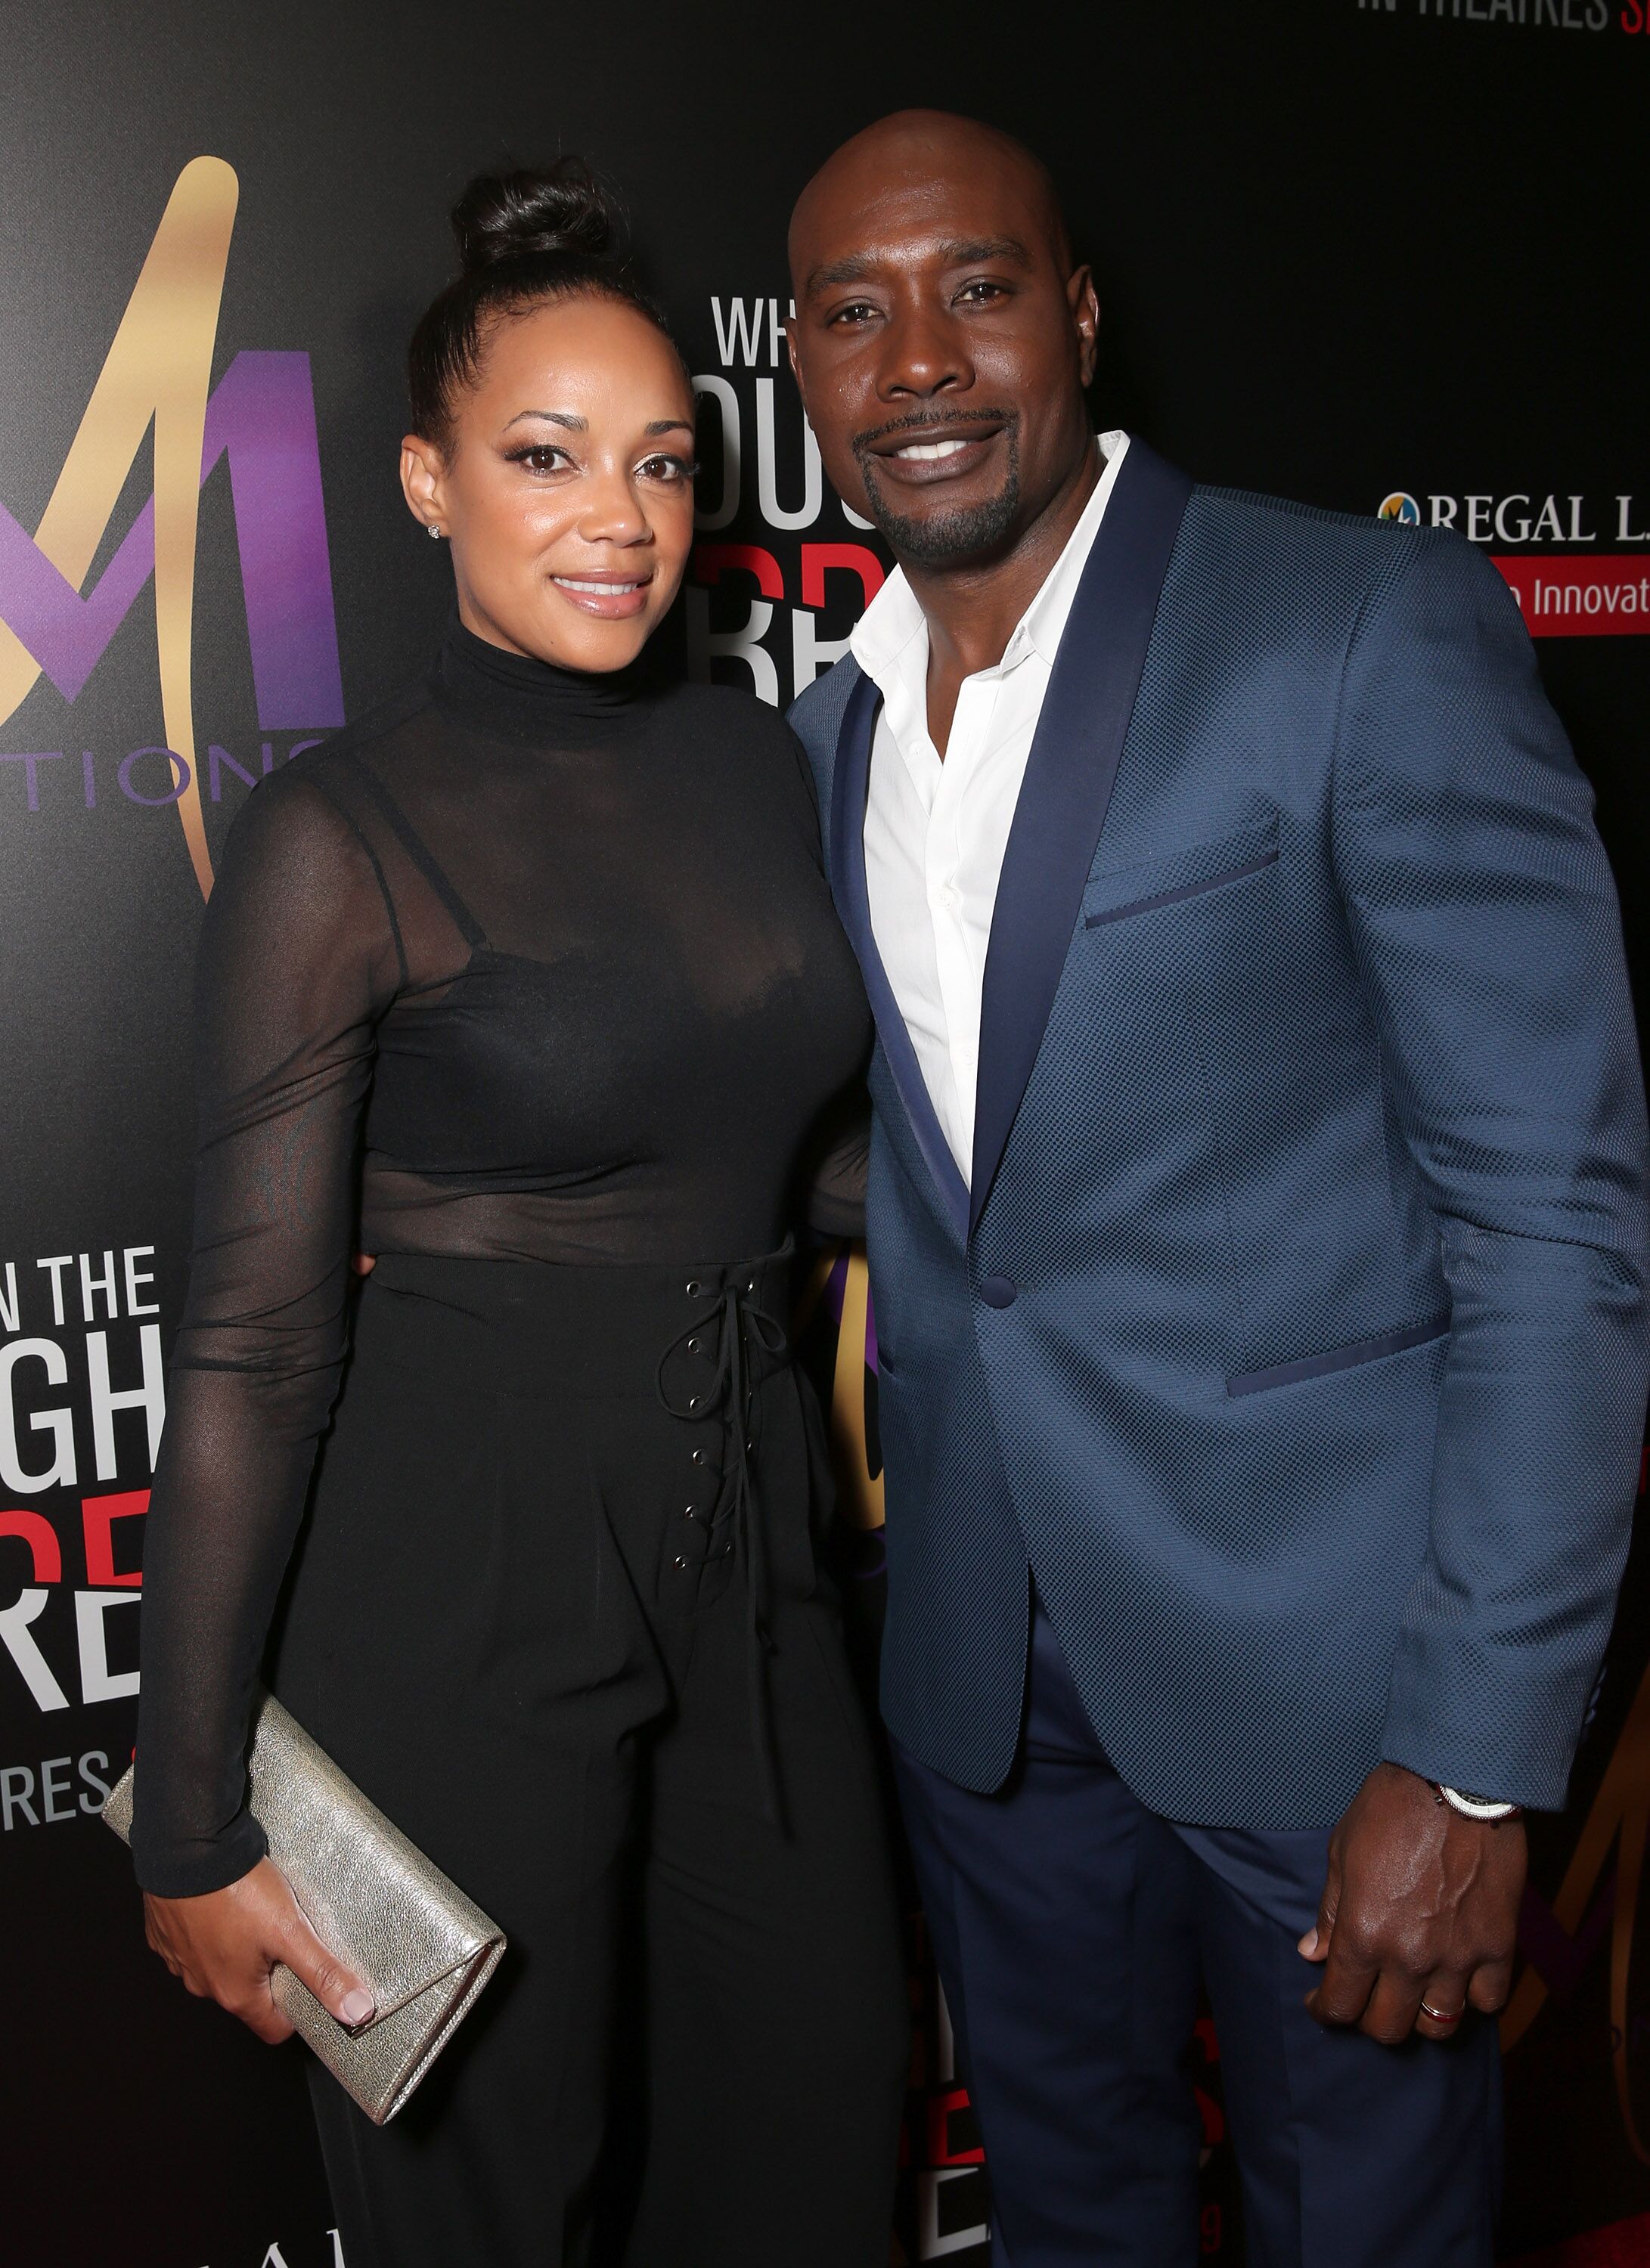 Paige Chestnut's parents Morris and his wife, Pam Byse Chestnut at the "When The Bough Breaks" premiere/ Source: Getty Images